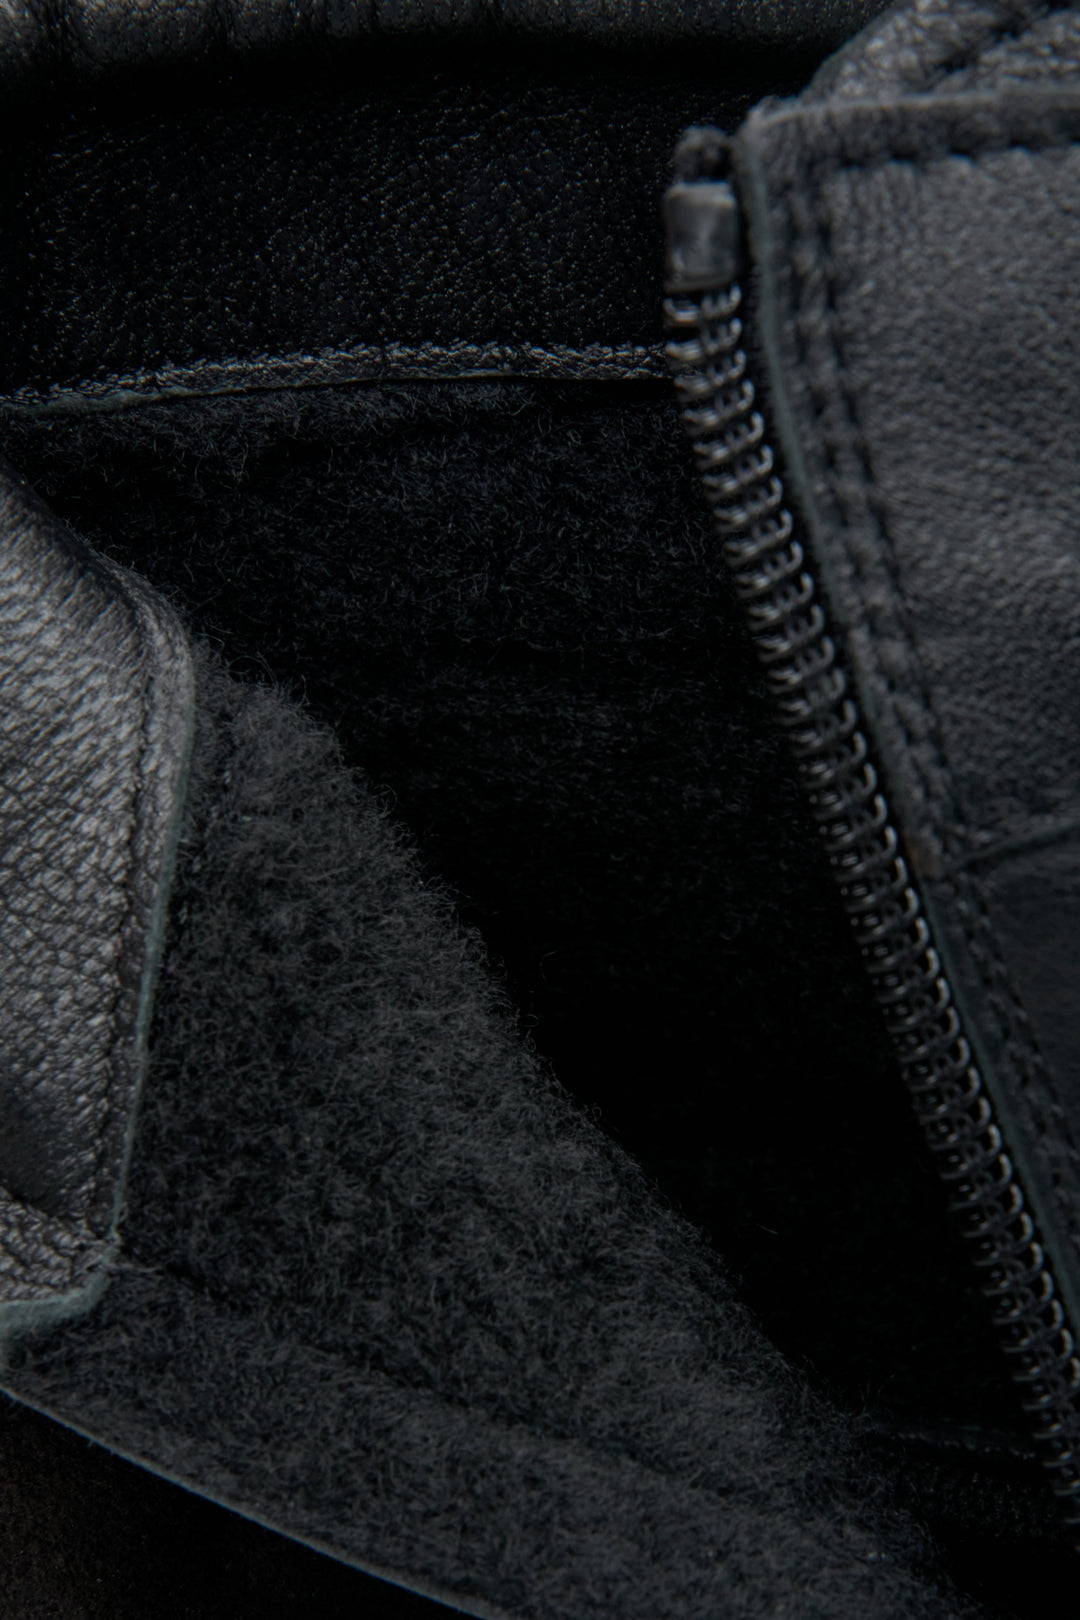 Men's back high-top Estro sneakers - close-up on the inside of the shoe.